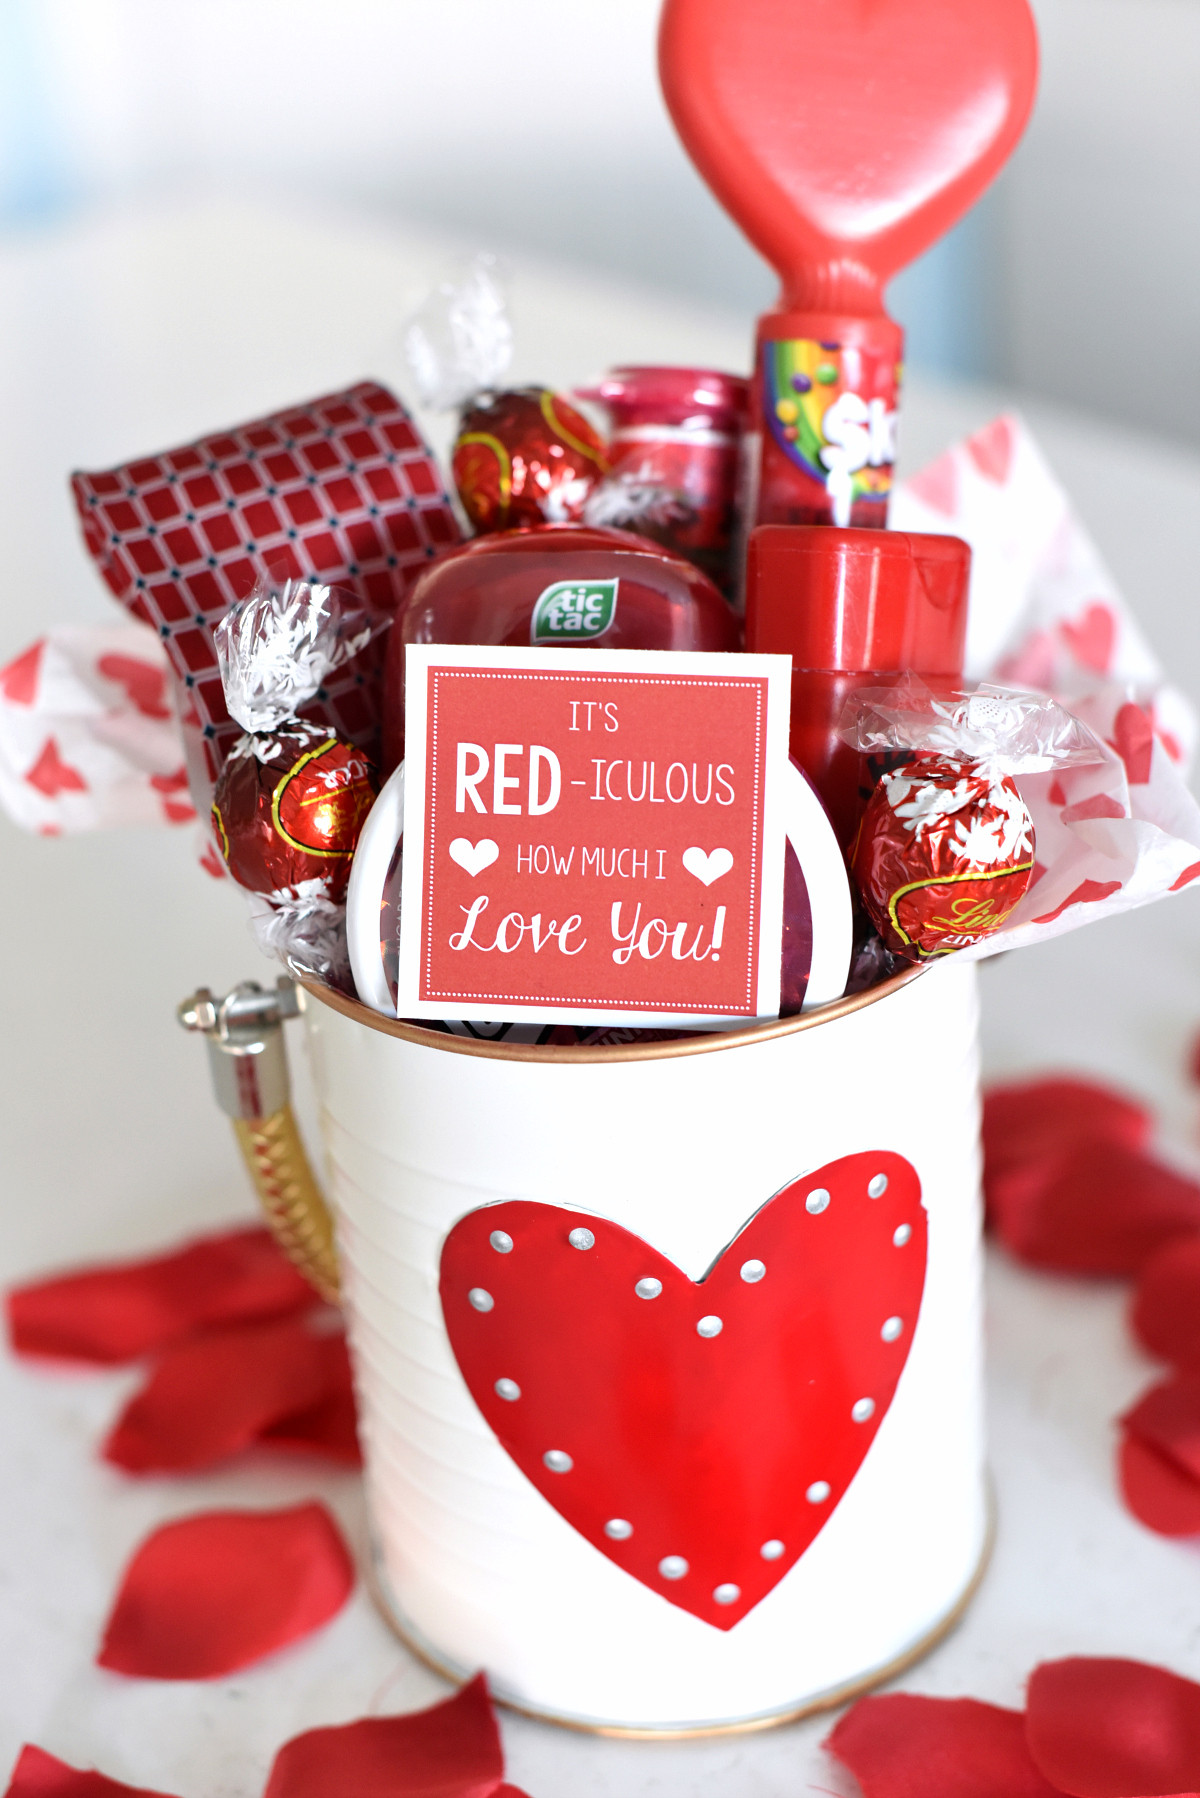 Best Gift Ideas For Valentine Day
 Cute Valentine s Day Gift Idea RED iculous Basket